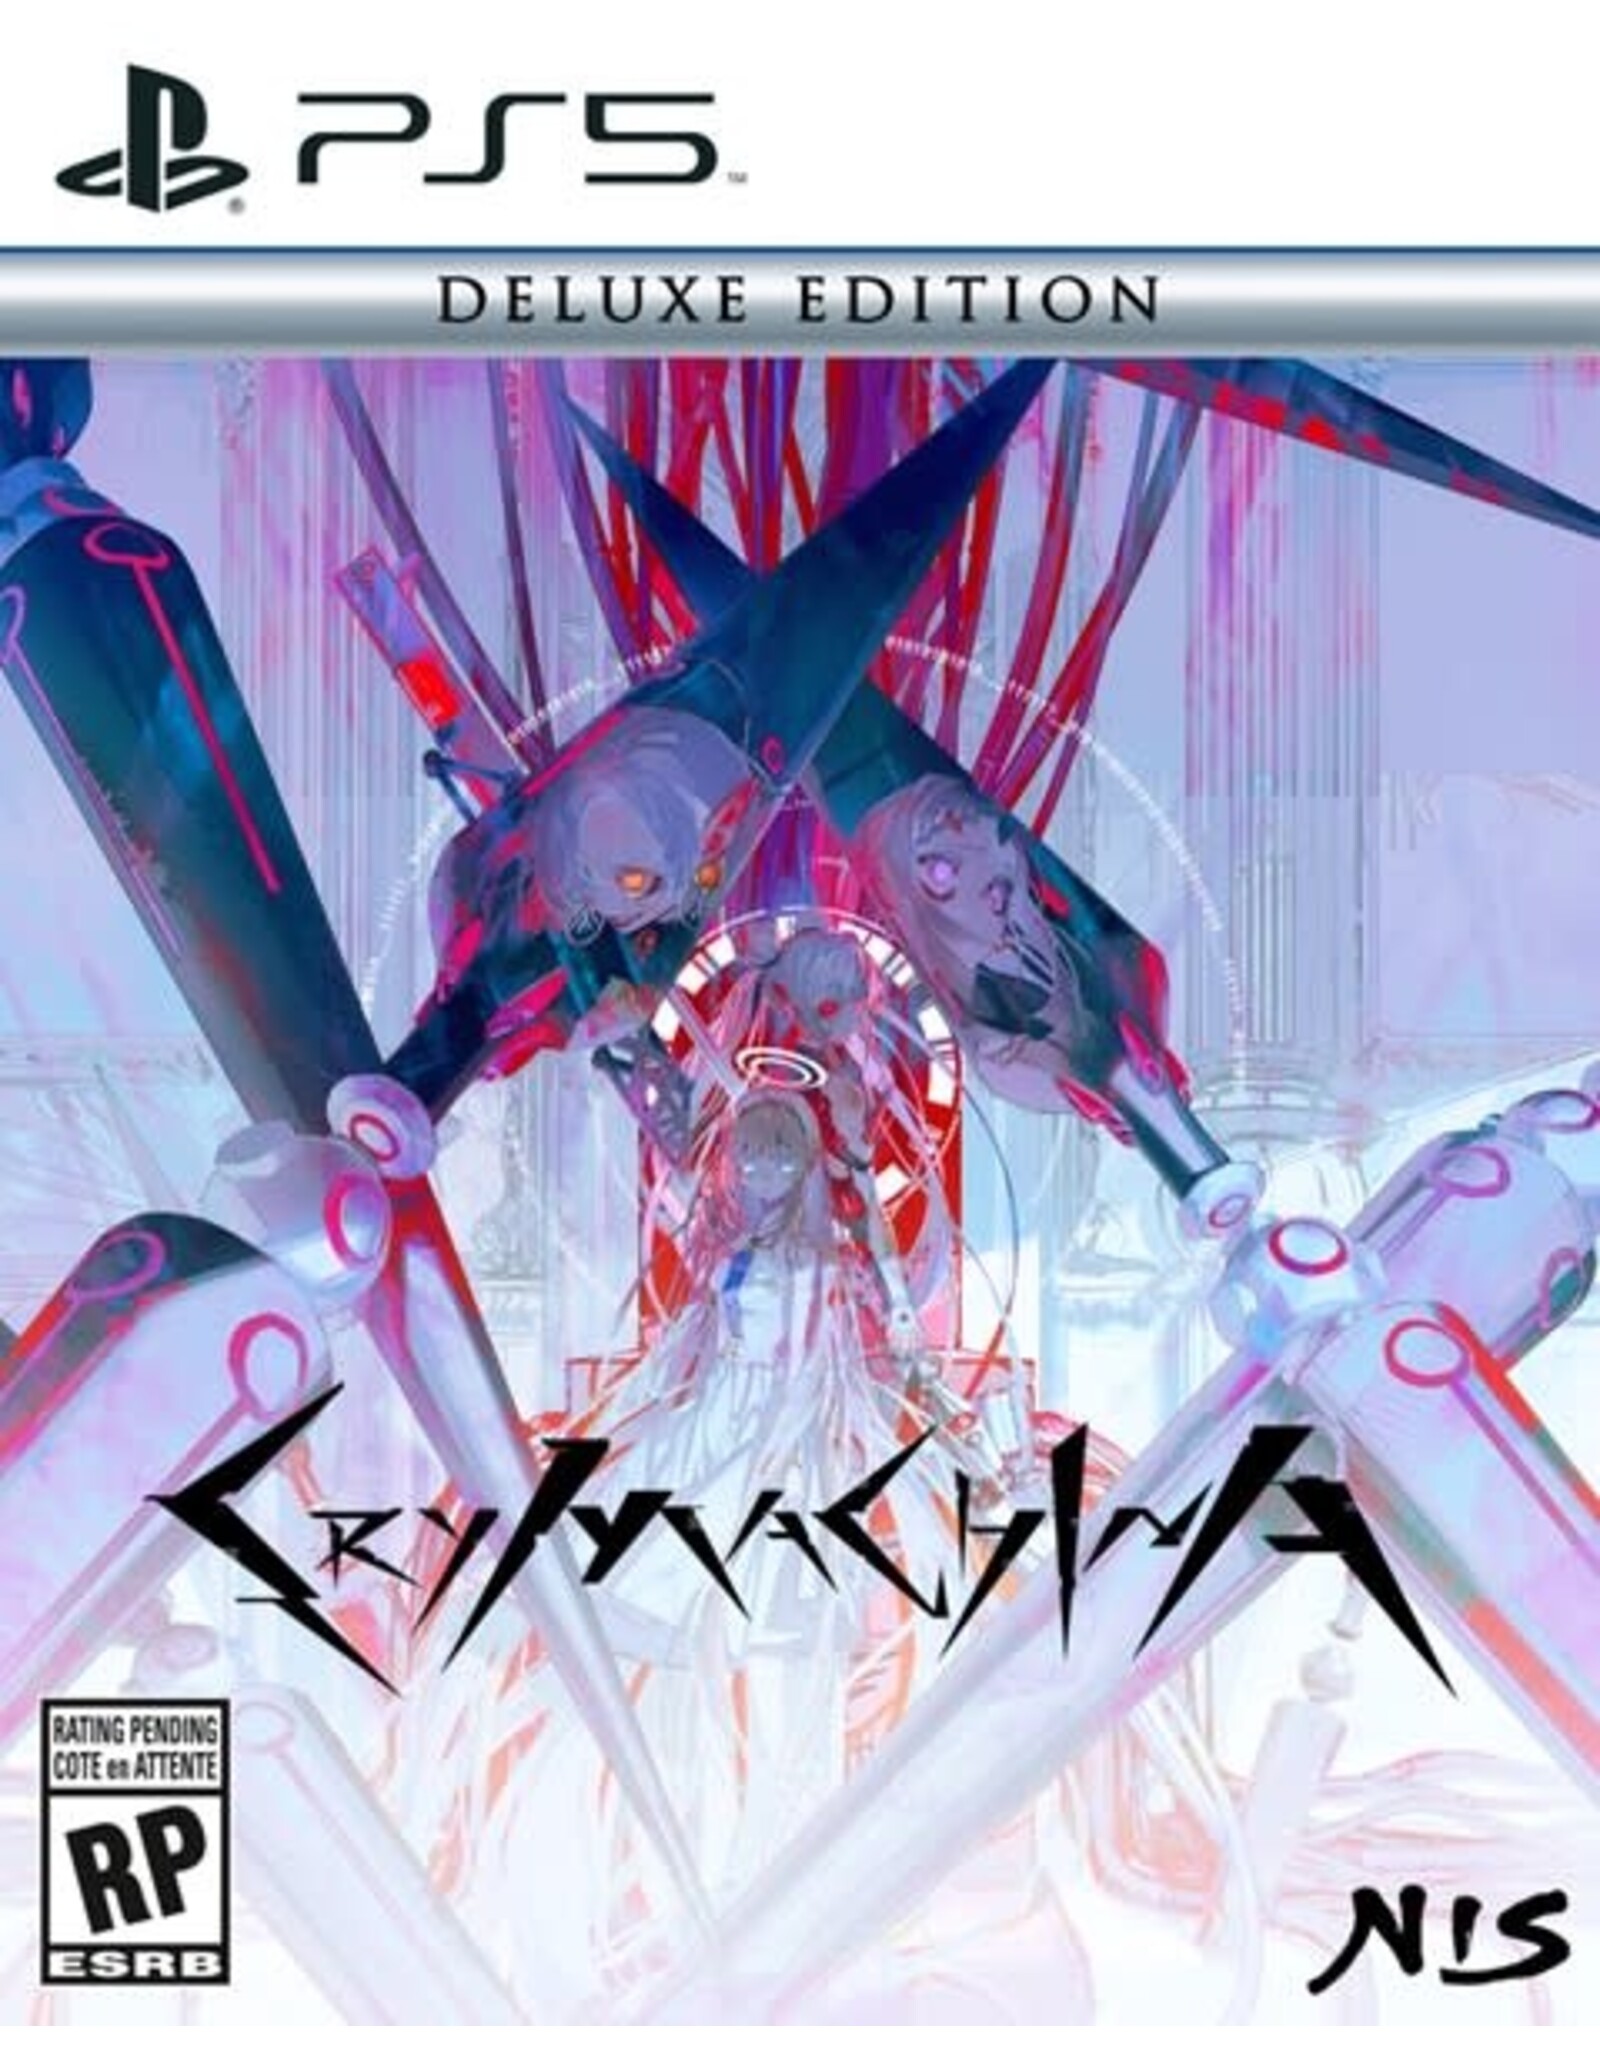 Playstation 5 Cry Machina Deluxe Edition (PS5)